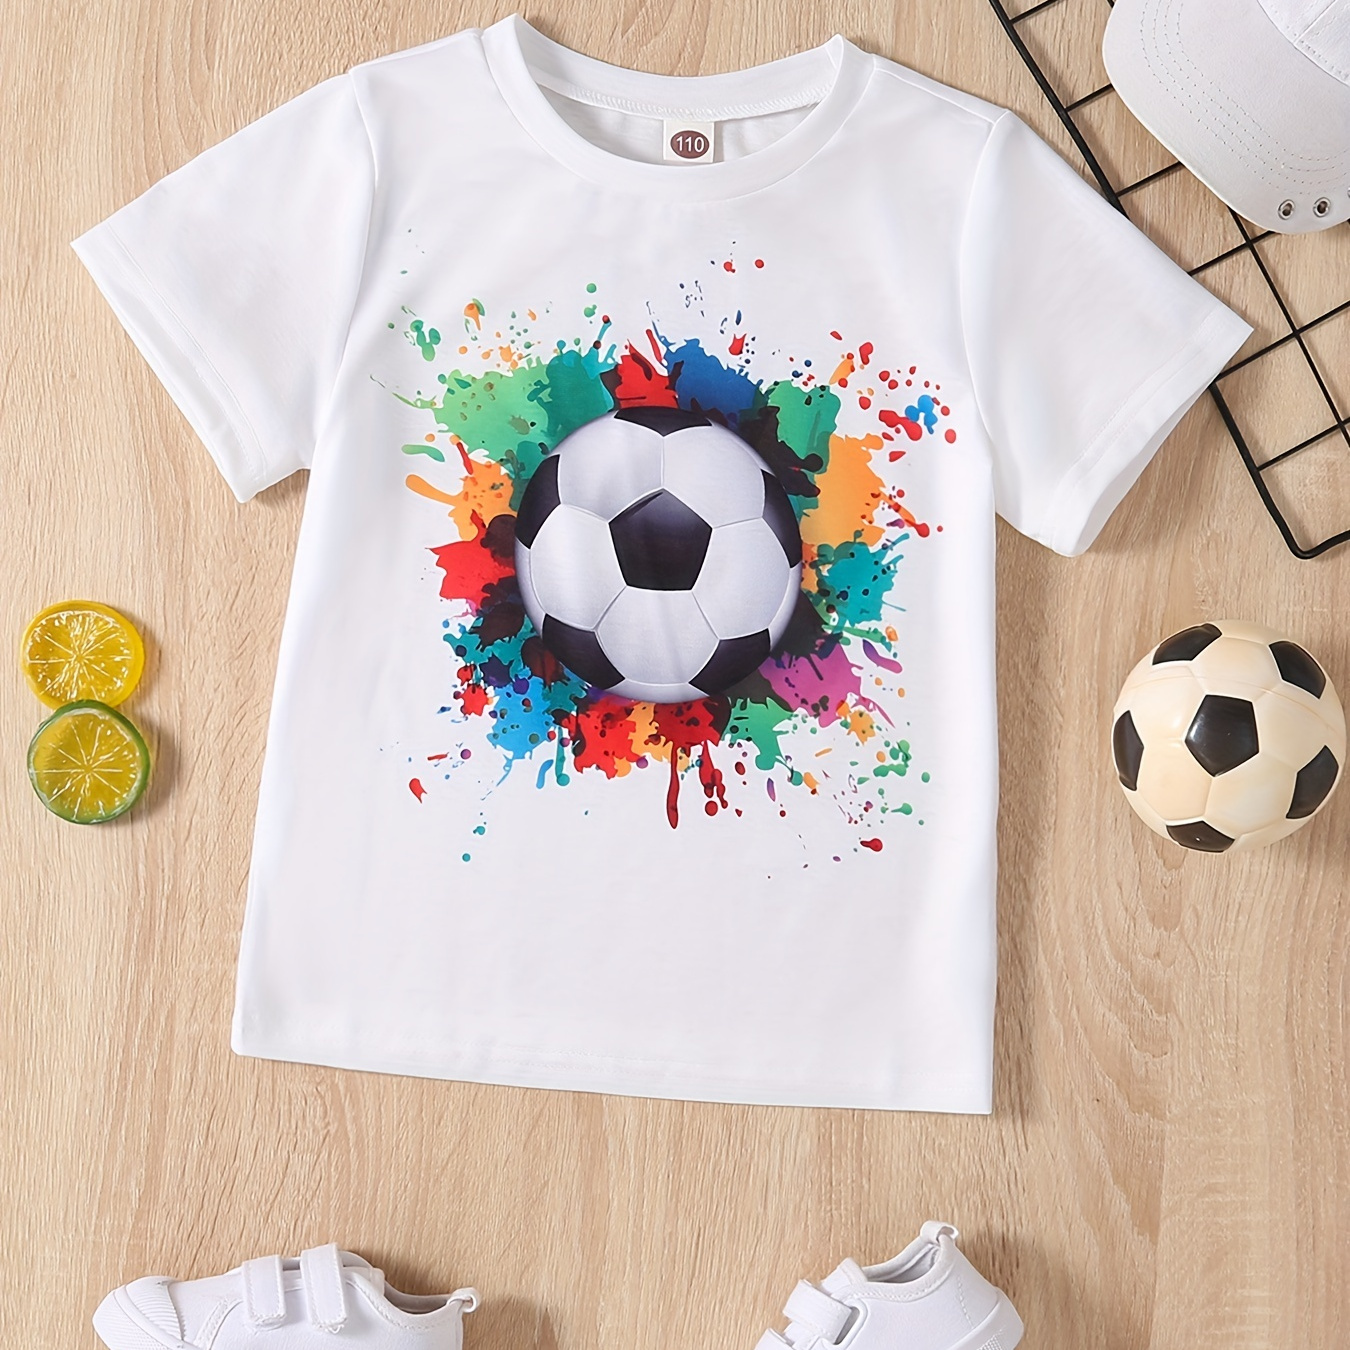 

Boys Casual T-shirt, Lightweight Comfy Short Sleeve Tops, Football Element Graphic Tees For Unisex Toddlers Summer, Kids Clothings